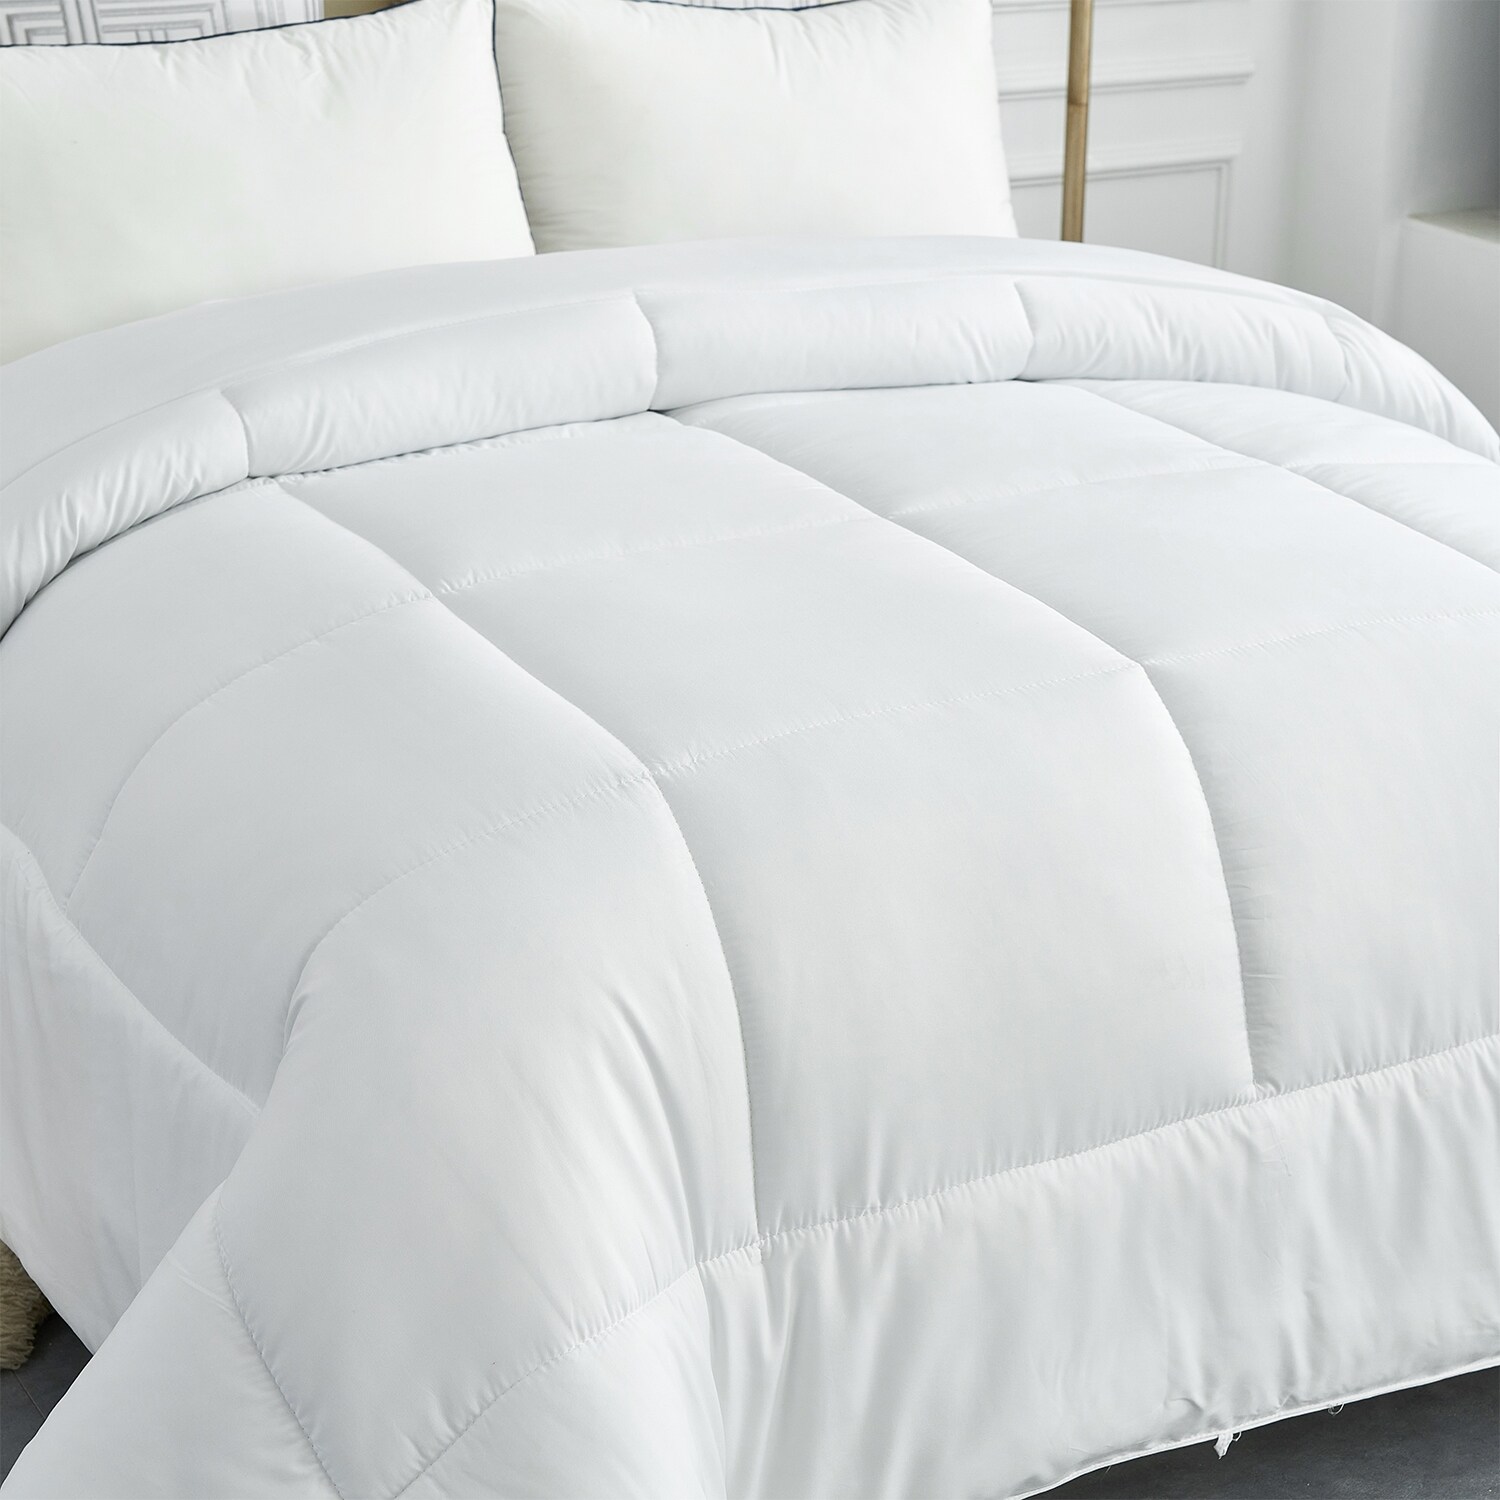 https://ak1.ostkcdn.com/images/products/is/images/direct/ddf881b8719704954d411ce1d20da6f97bd799b7/Lightweight-White-Down-Alternative-Comforter-With-Box.jpg